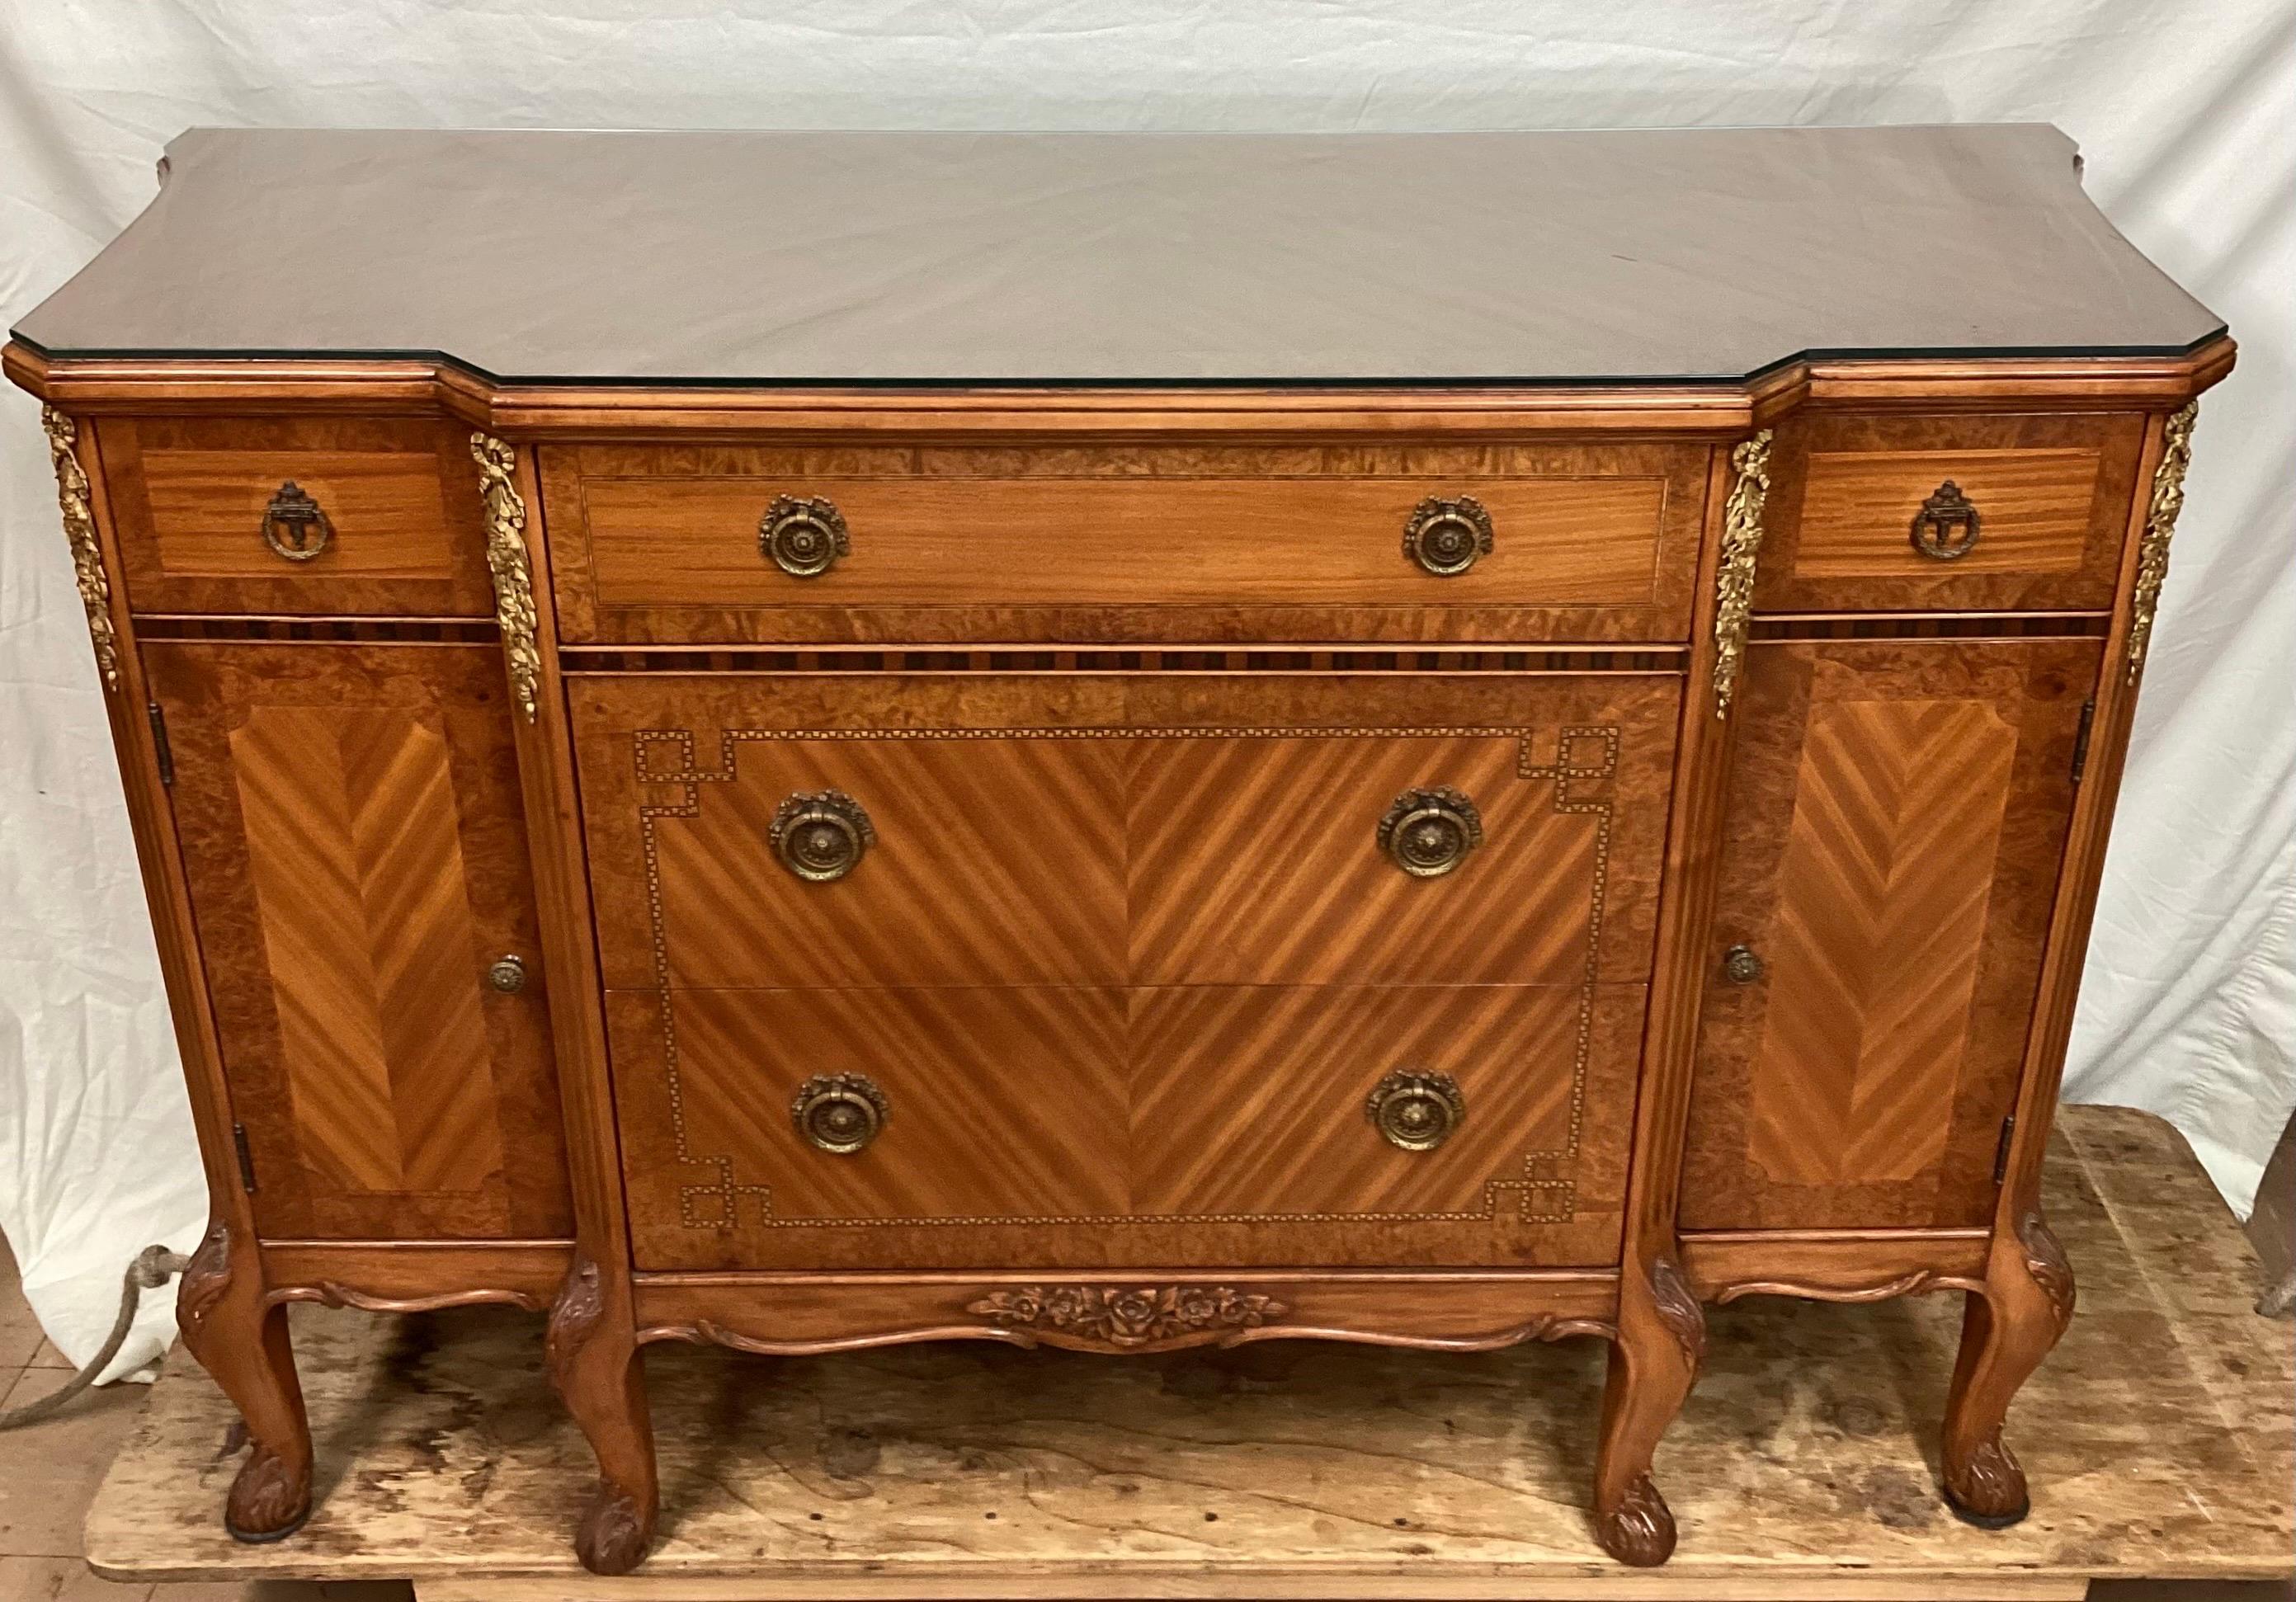 20th Century Antique French Satinwood Dresser / Sideboard with Bronze Mounts For Sale